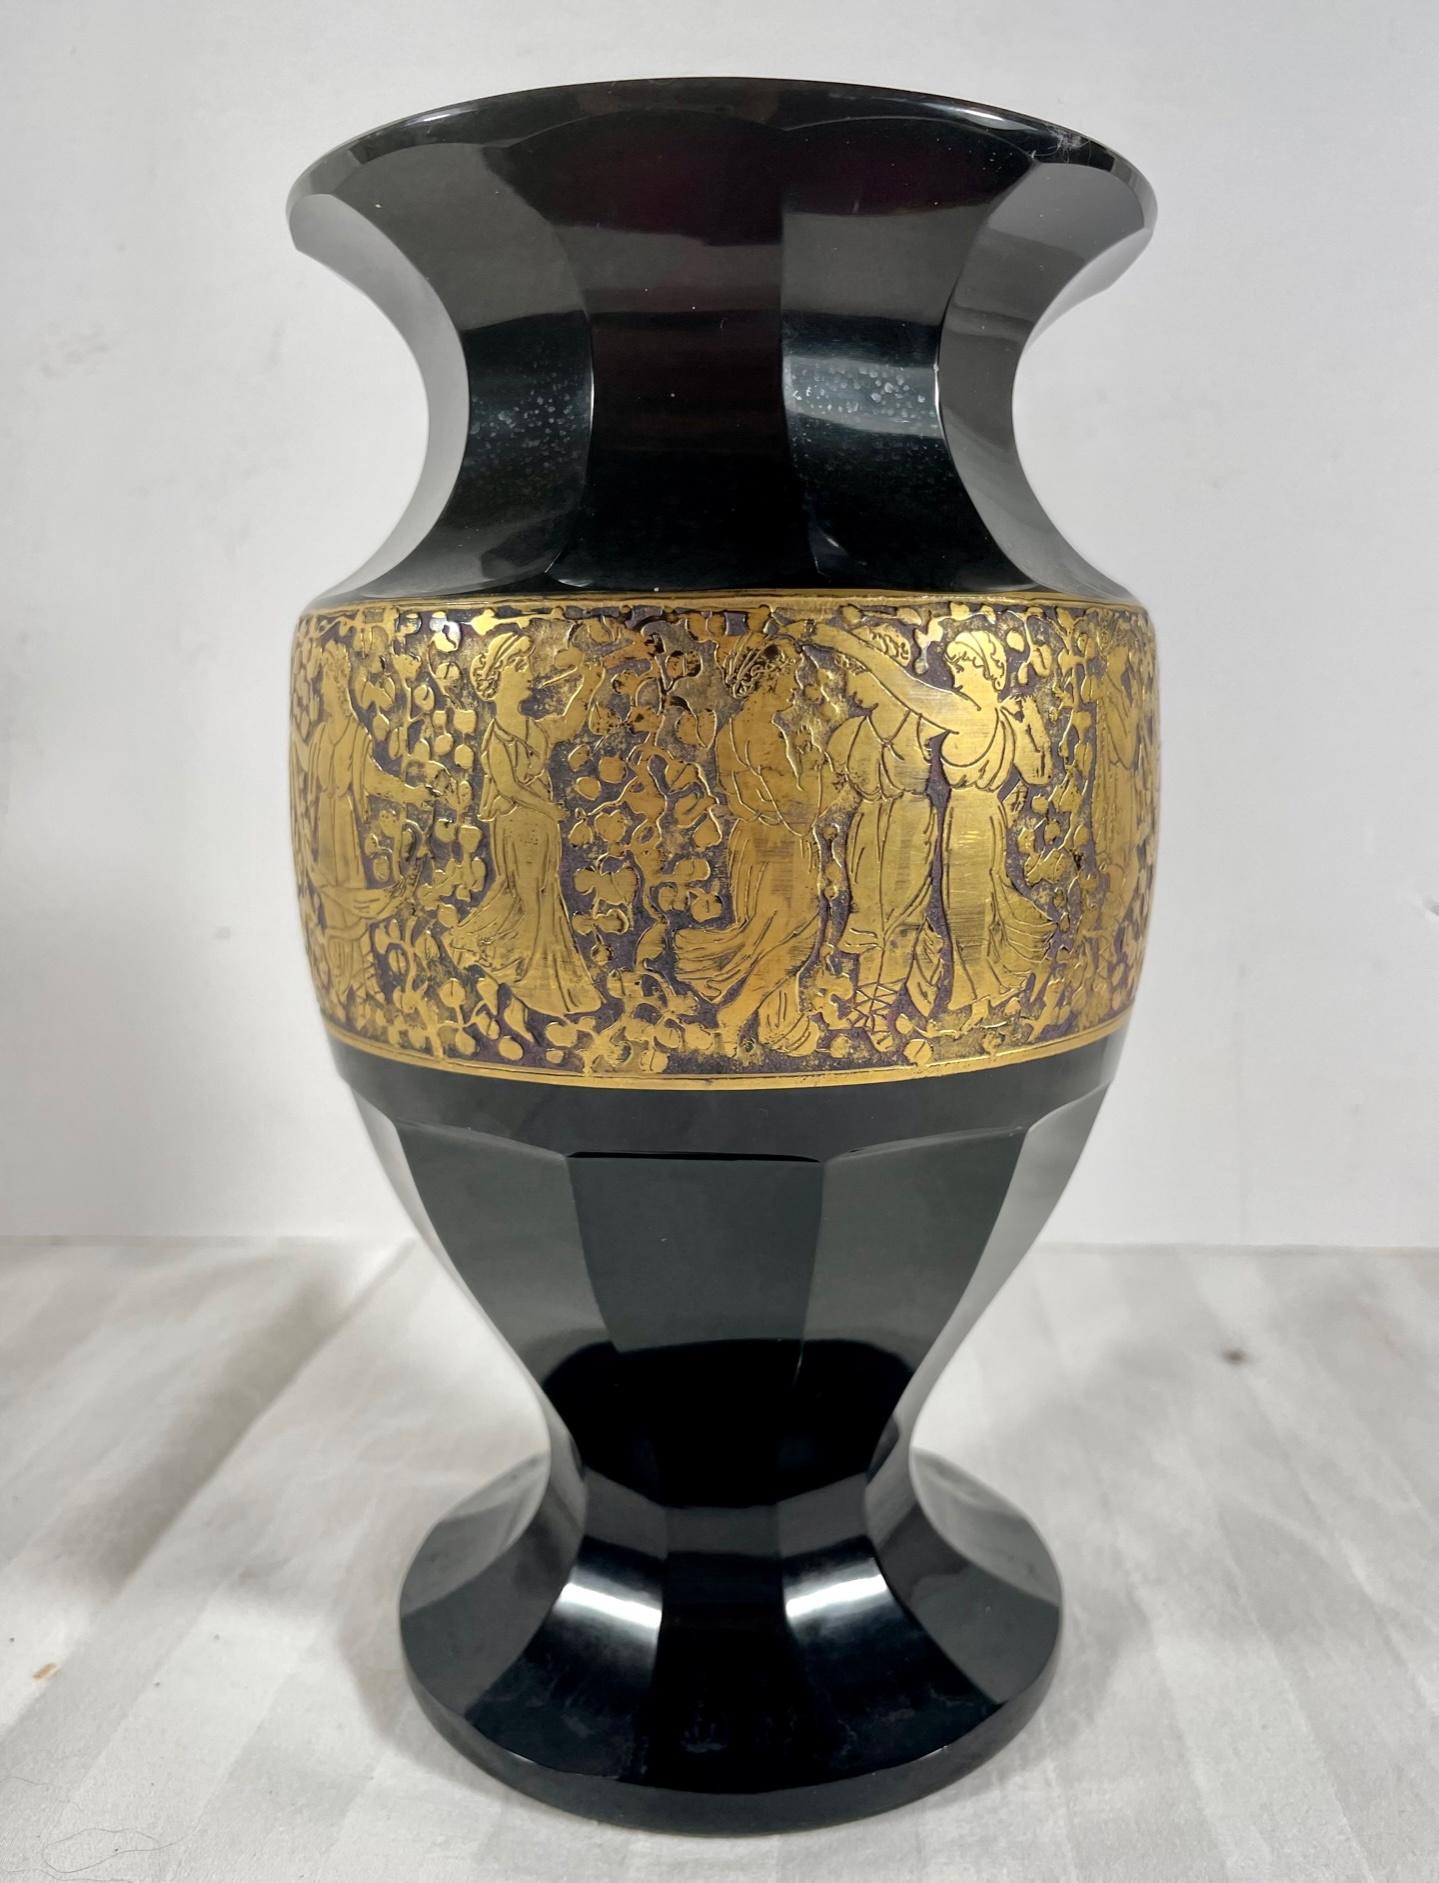 Art Nouveau Haida Moser Amethyst Amphora Vase by Adolf Rasche c1910, Signed.

A beautiful and heavy Moser rich amethyst vase with gold gilded frieze. Hand blown purple crystal with a wide band of gold around the shoulder. Decorated with a cameo cut